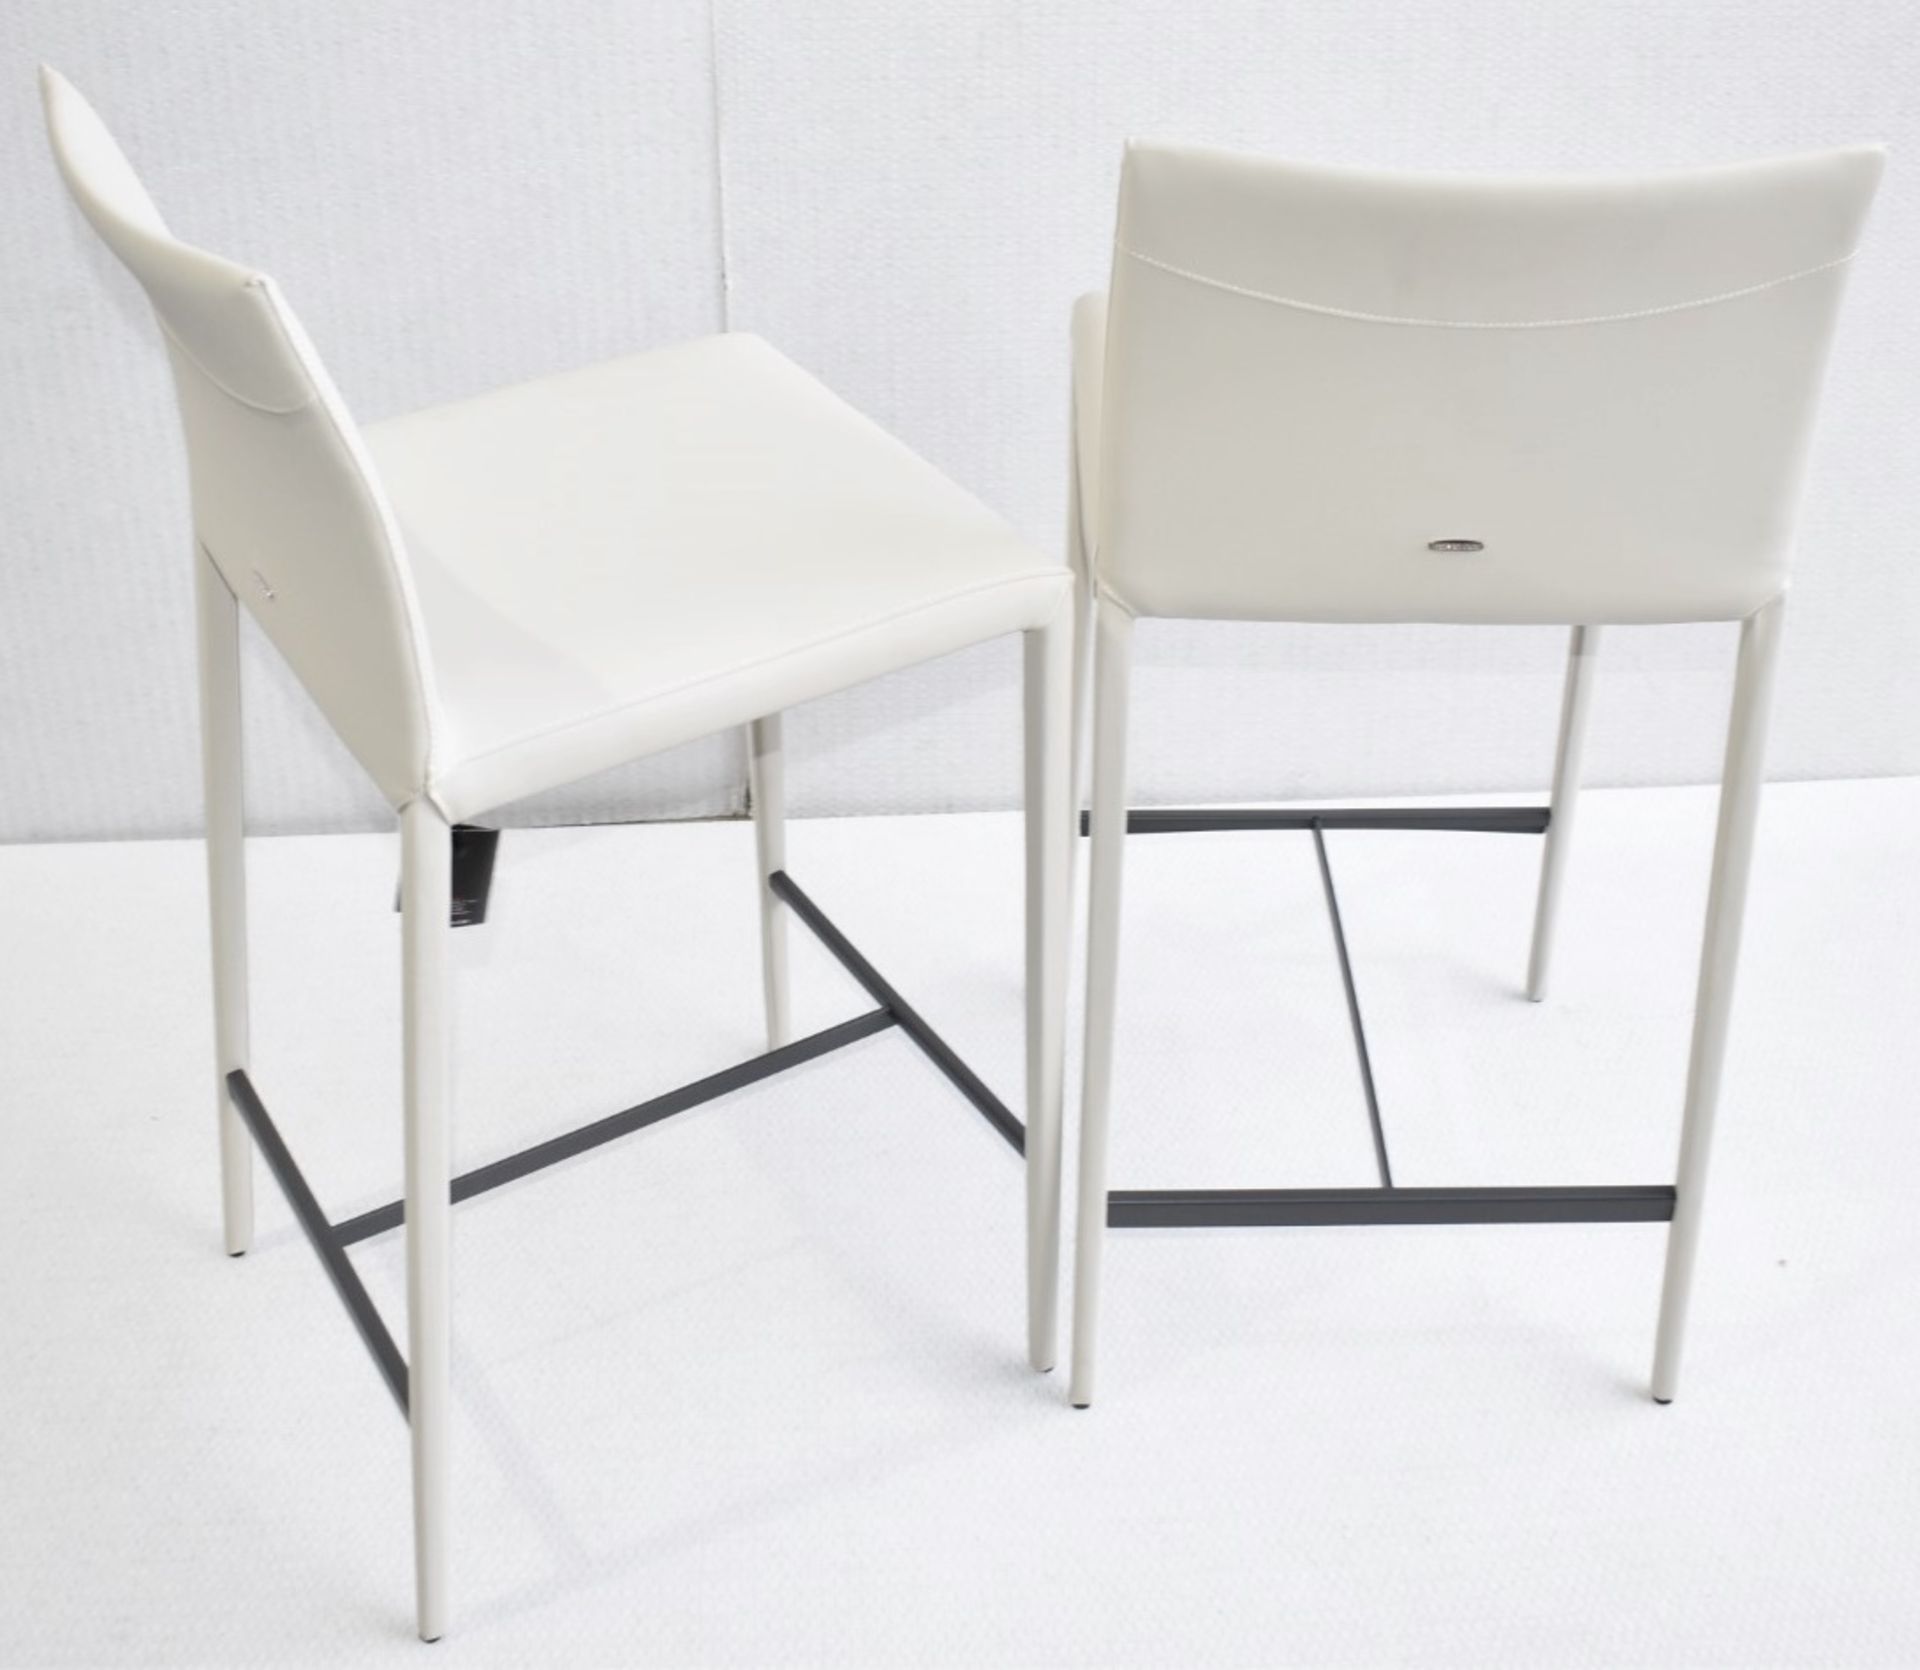 Pair of CATTELAN ITALIA 'Norma' Designer Fully Upholstered Stools in a Light Synthetic Leather - Image 4 of 9